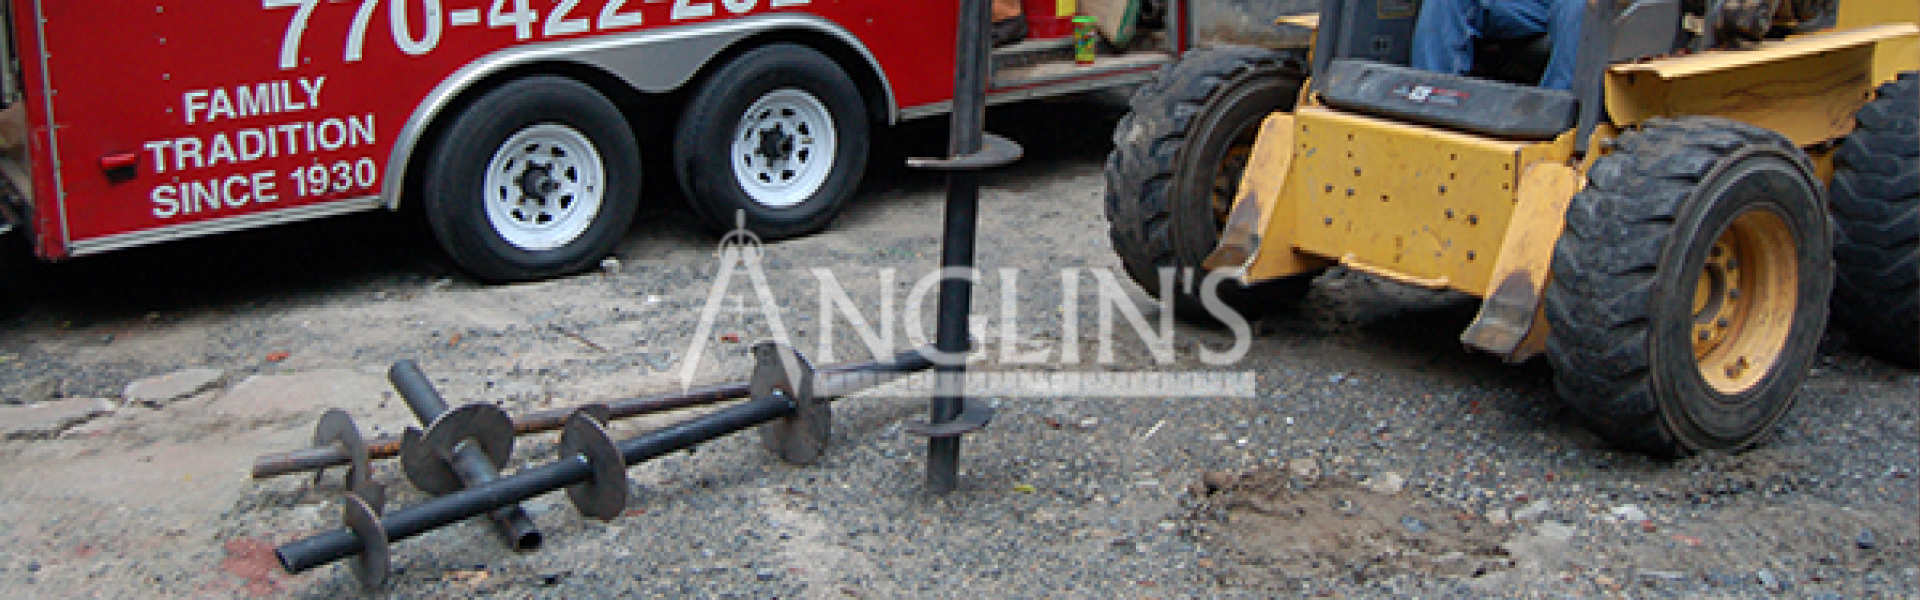 helical piers lying on the ground next to anglin's truck